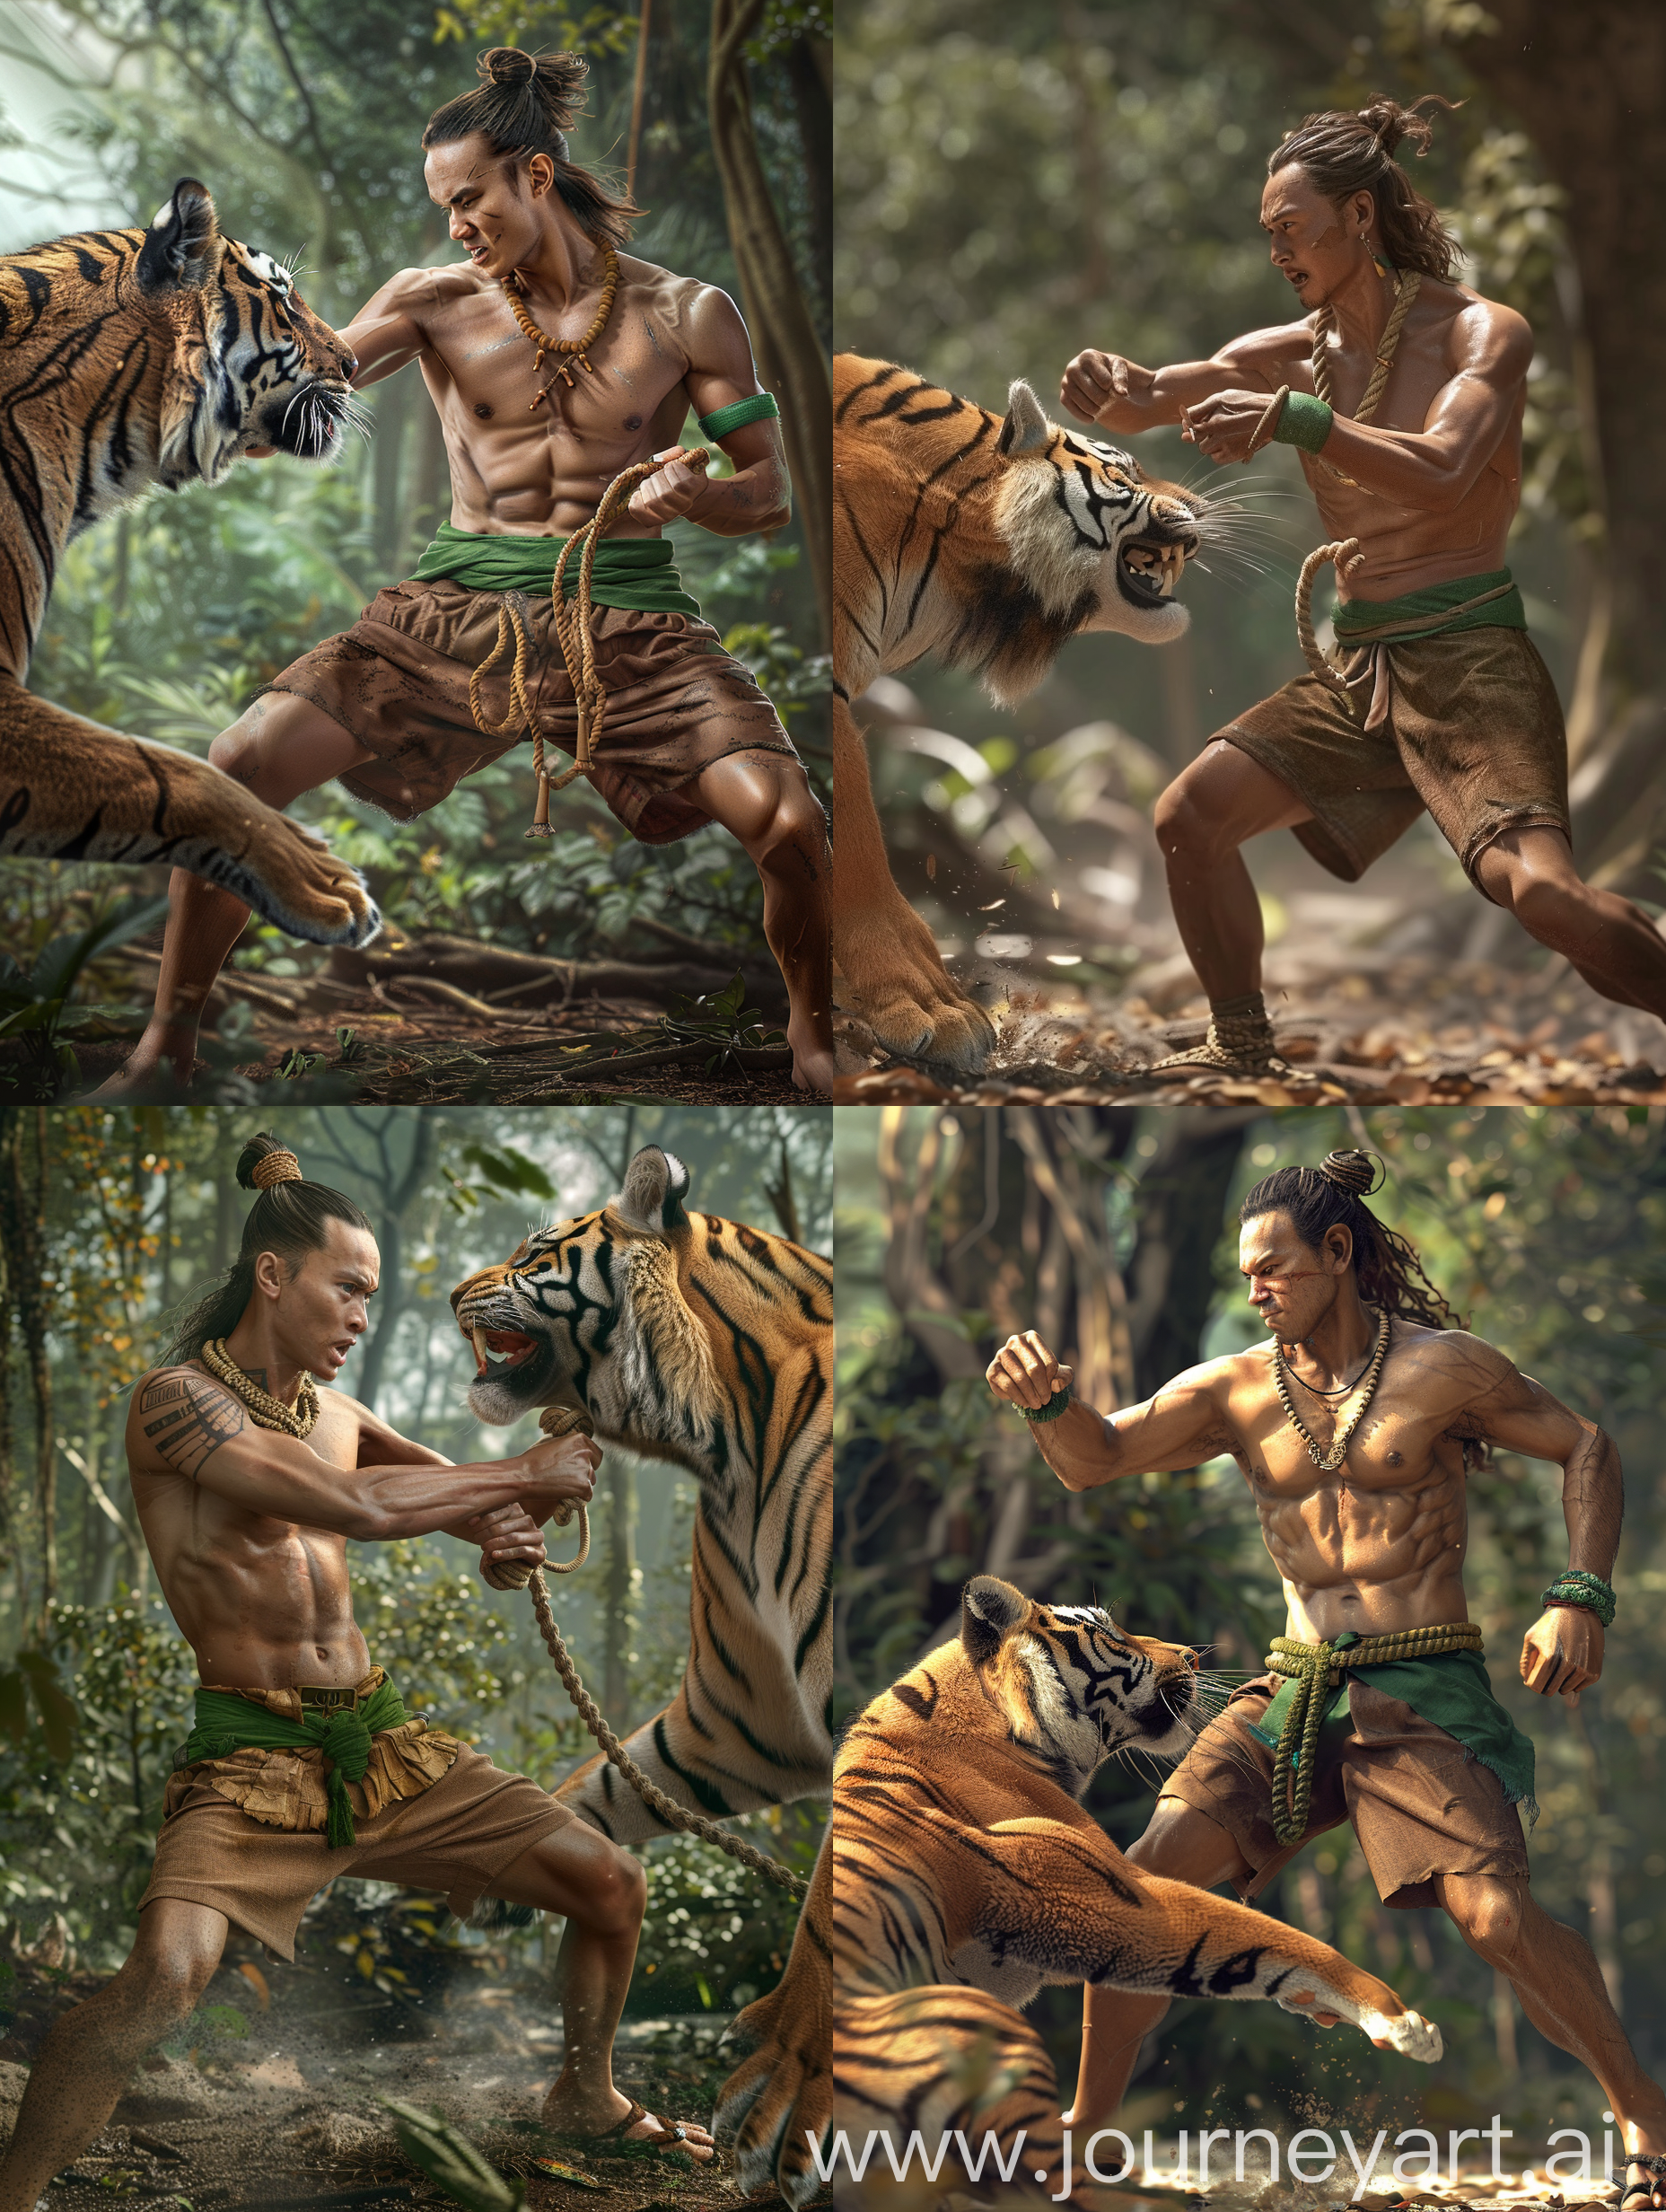 Cinematic, movie scene style, 30 year old Indonesian man with square and clean face, long hair in a small bun, stocky body, wearing a rope necklace, green cloth bracelet, brown shorts, green cloth belt, strappy sandals, fighting with a tiger, in in daylight forest, Very detailed, very real, ultra HD